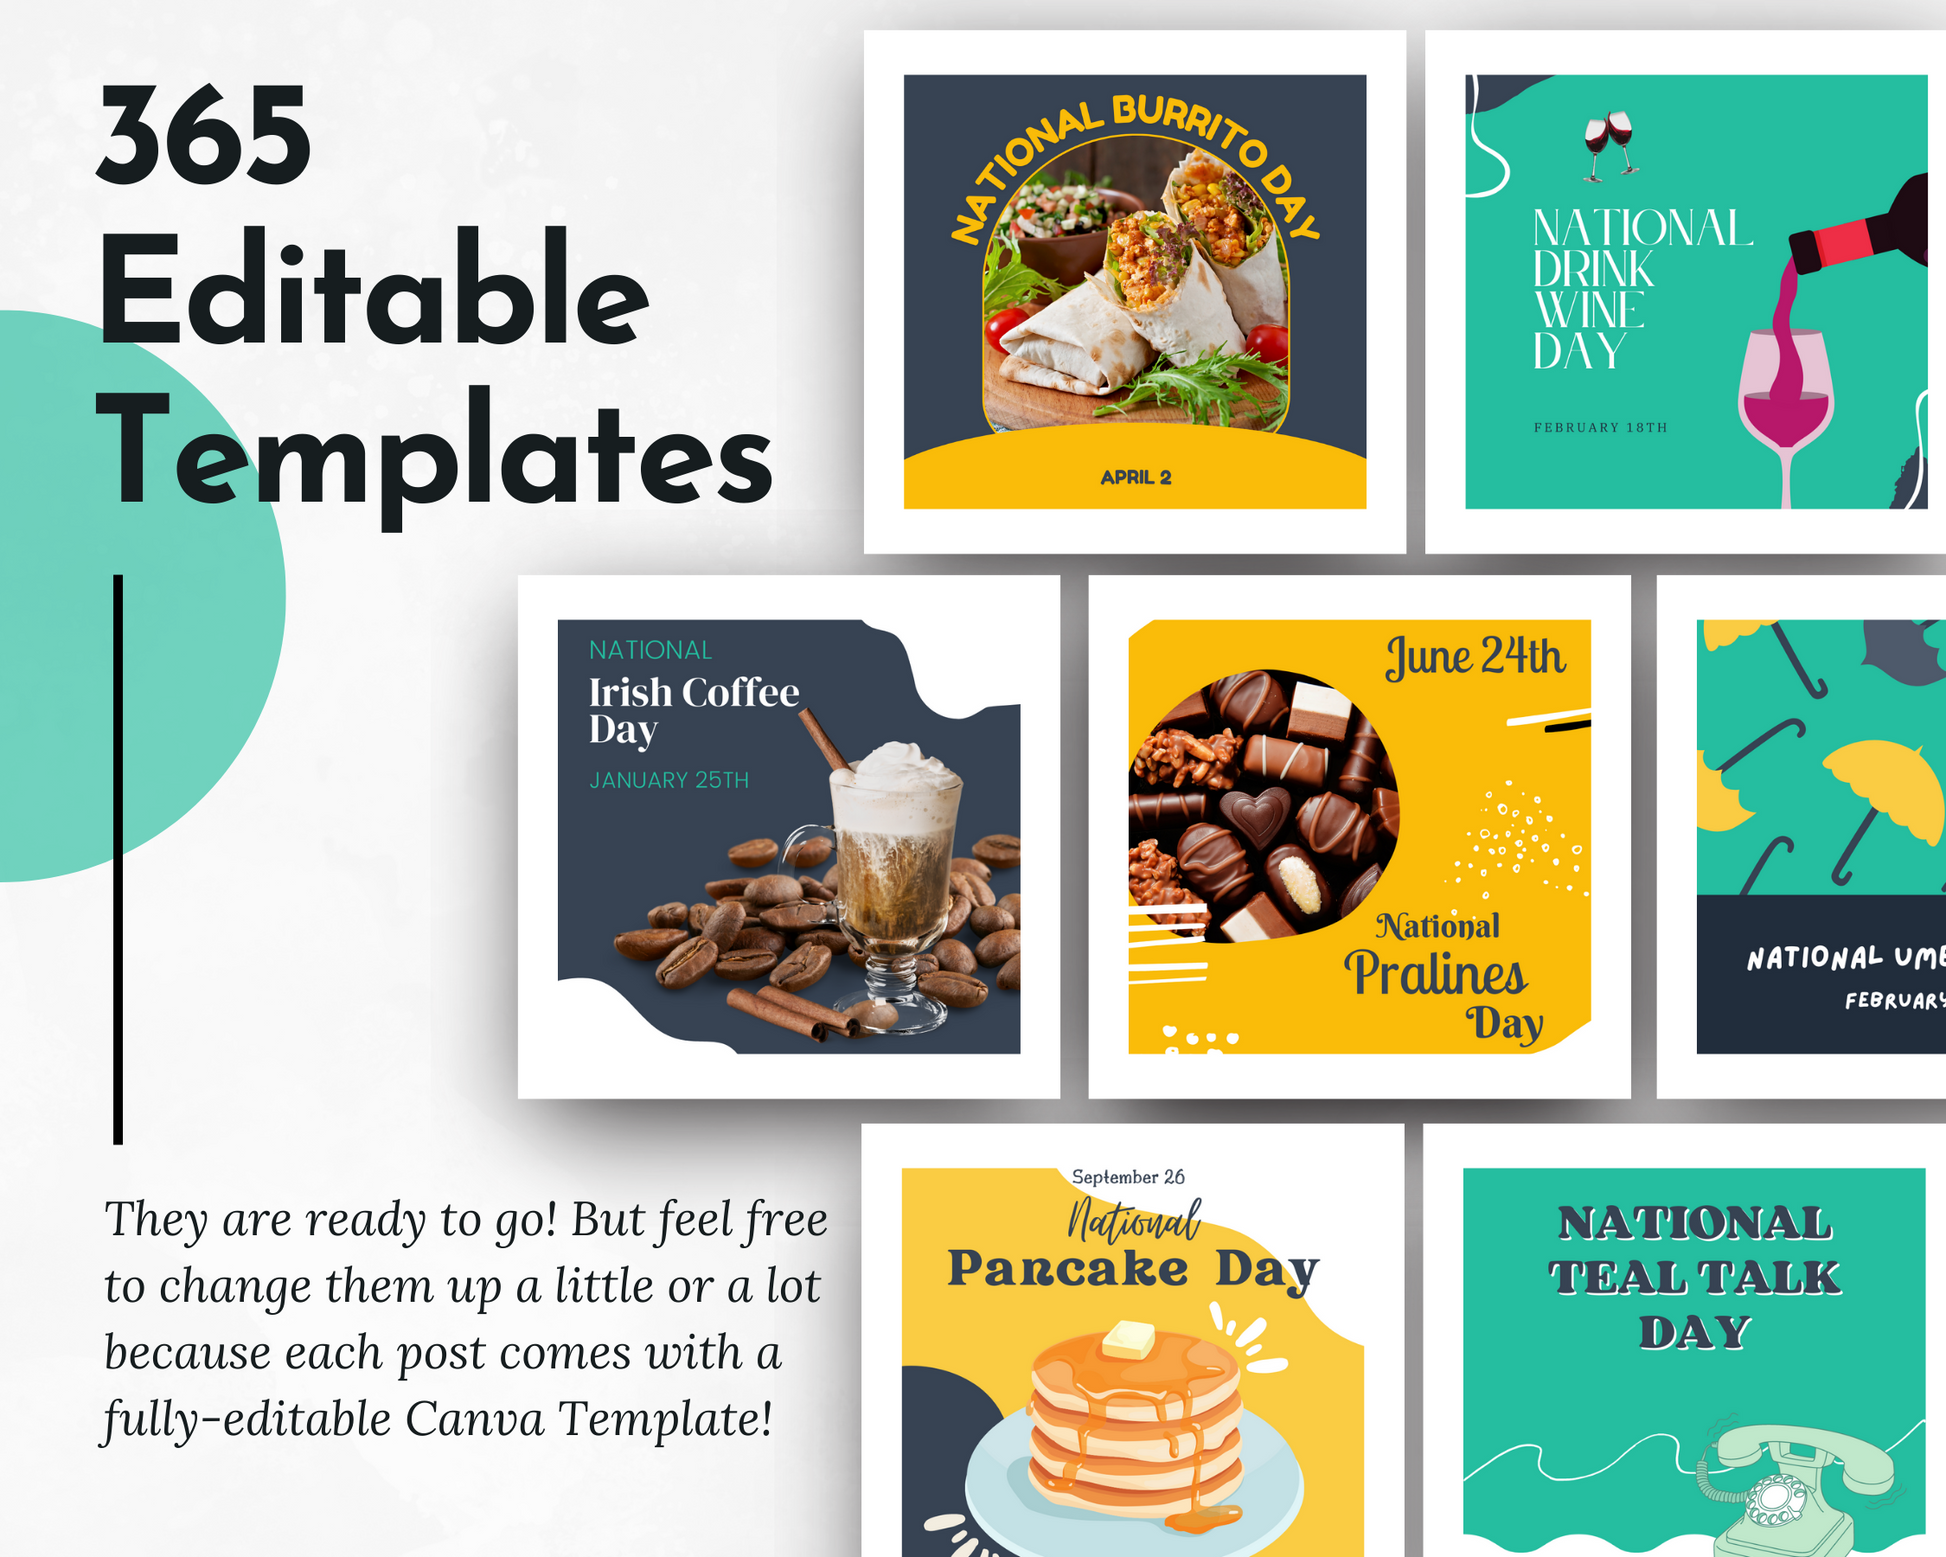 365 National Days Social Media Post Bundle with Canva Templates for customer engagement and social media marketing, brought to you by Socially Inclined.